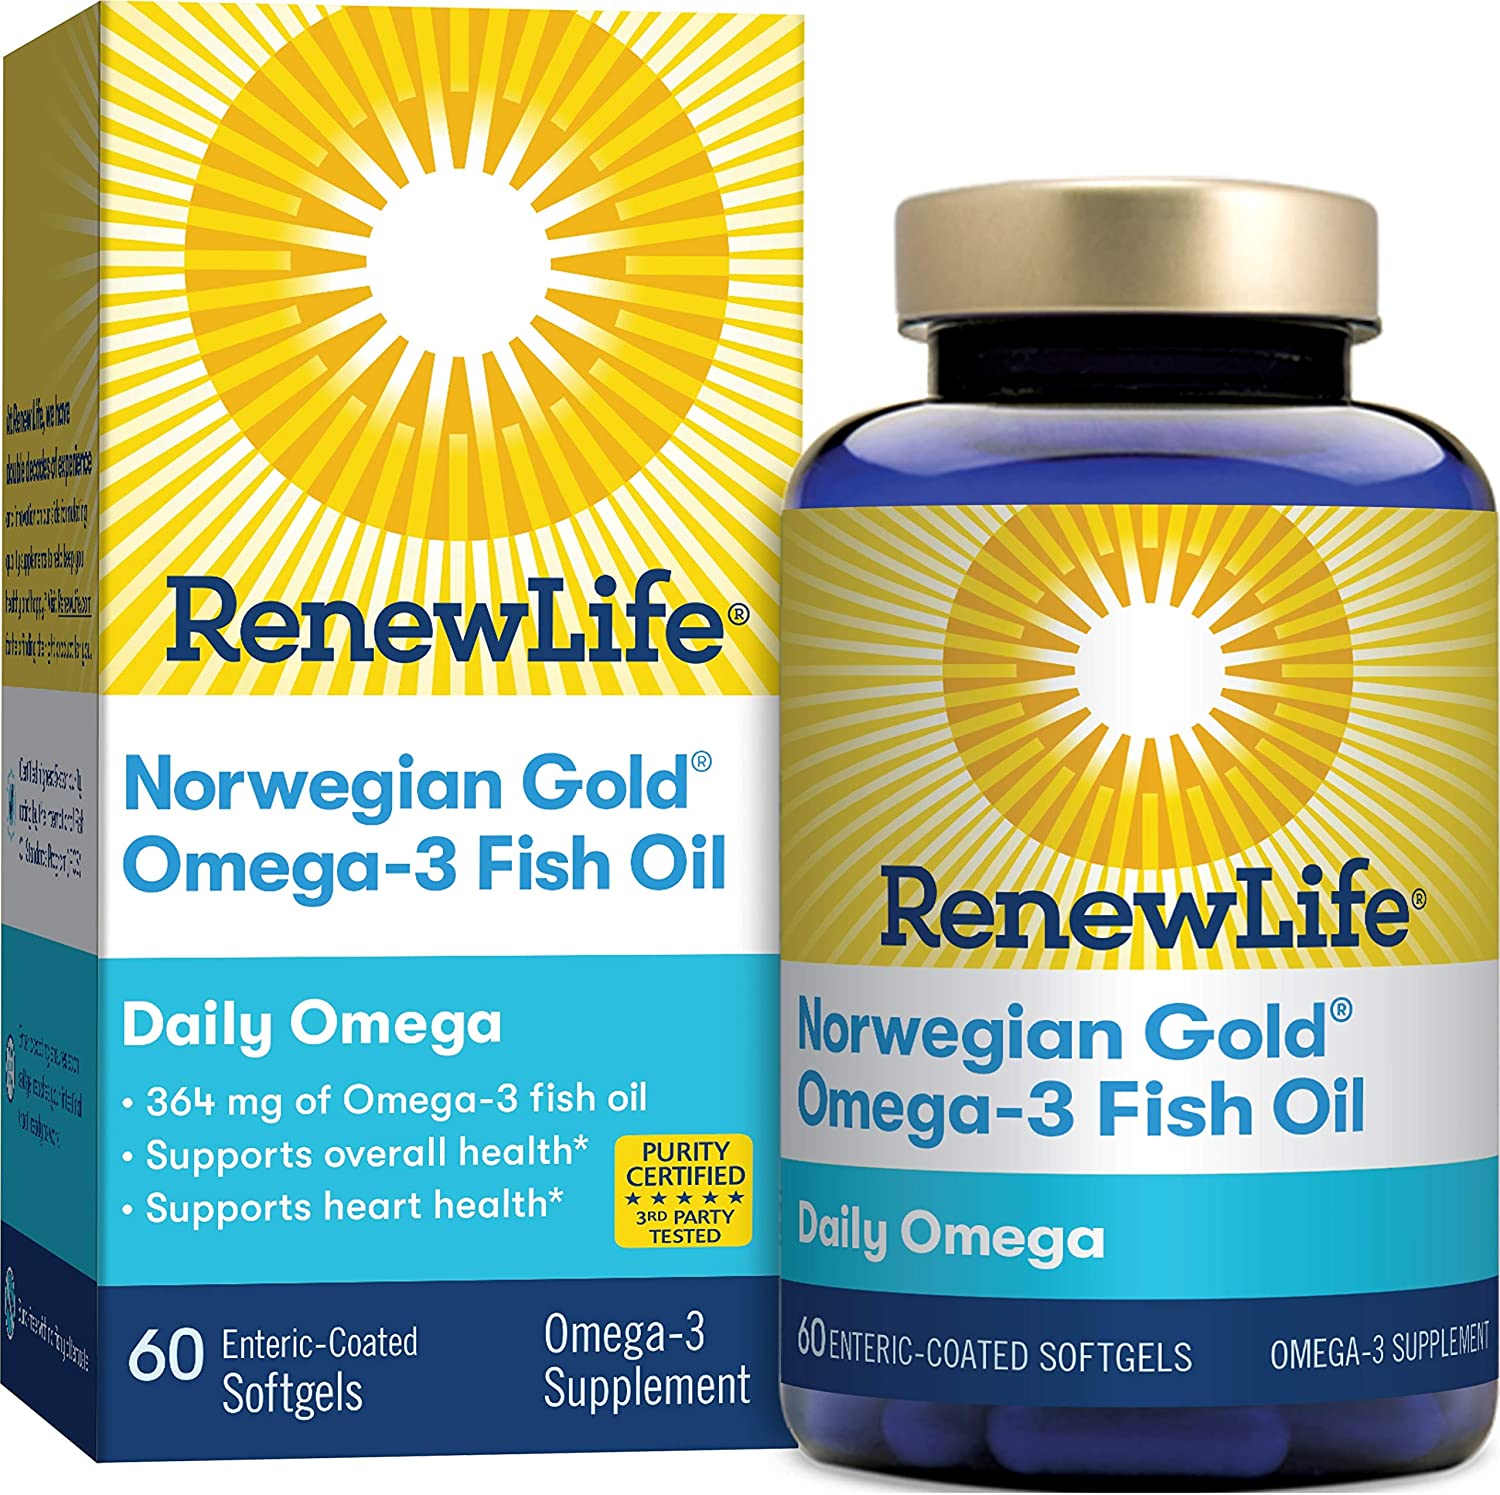 Renew Life Re Norwegian Gold Daily Omega, 60 Soft Gels